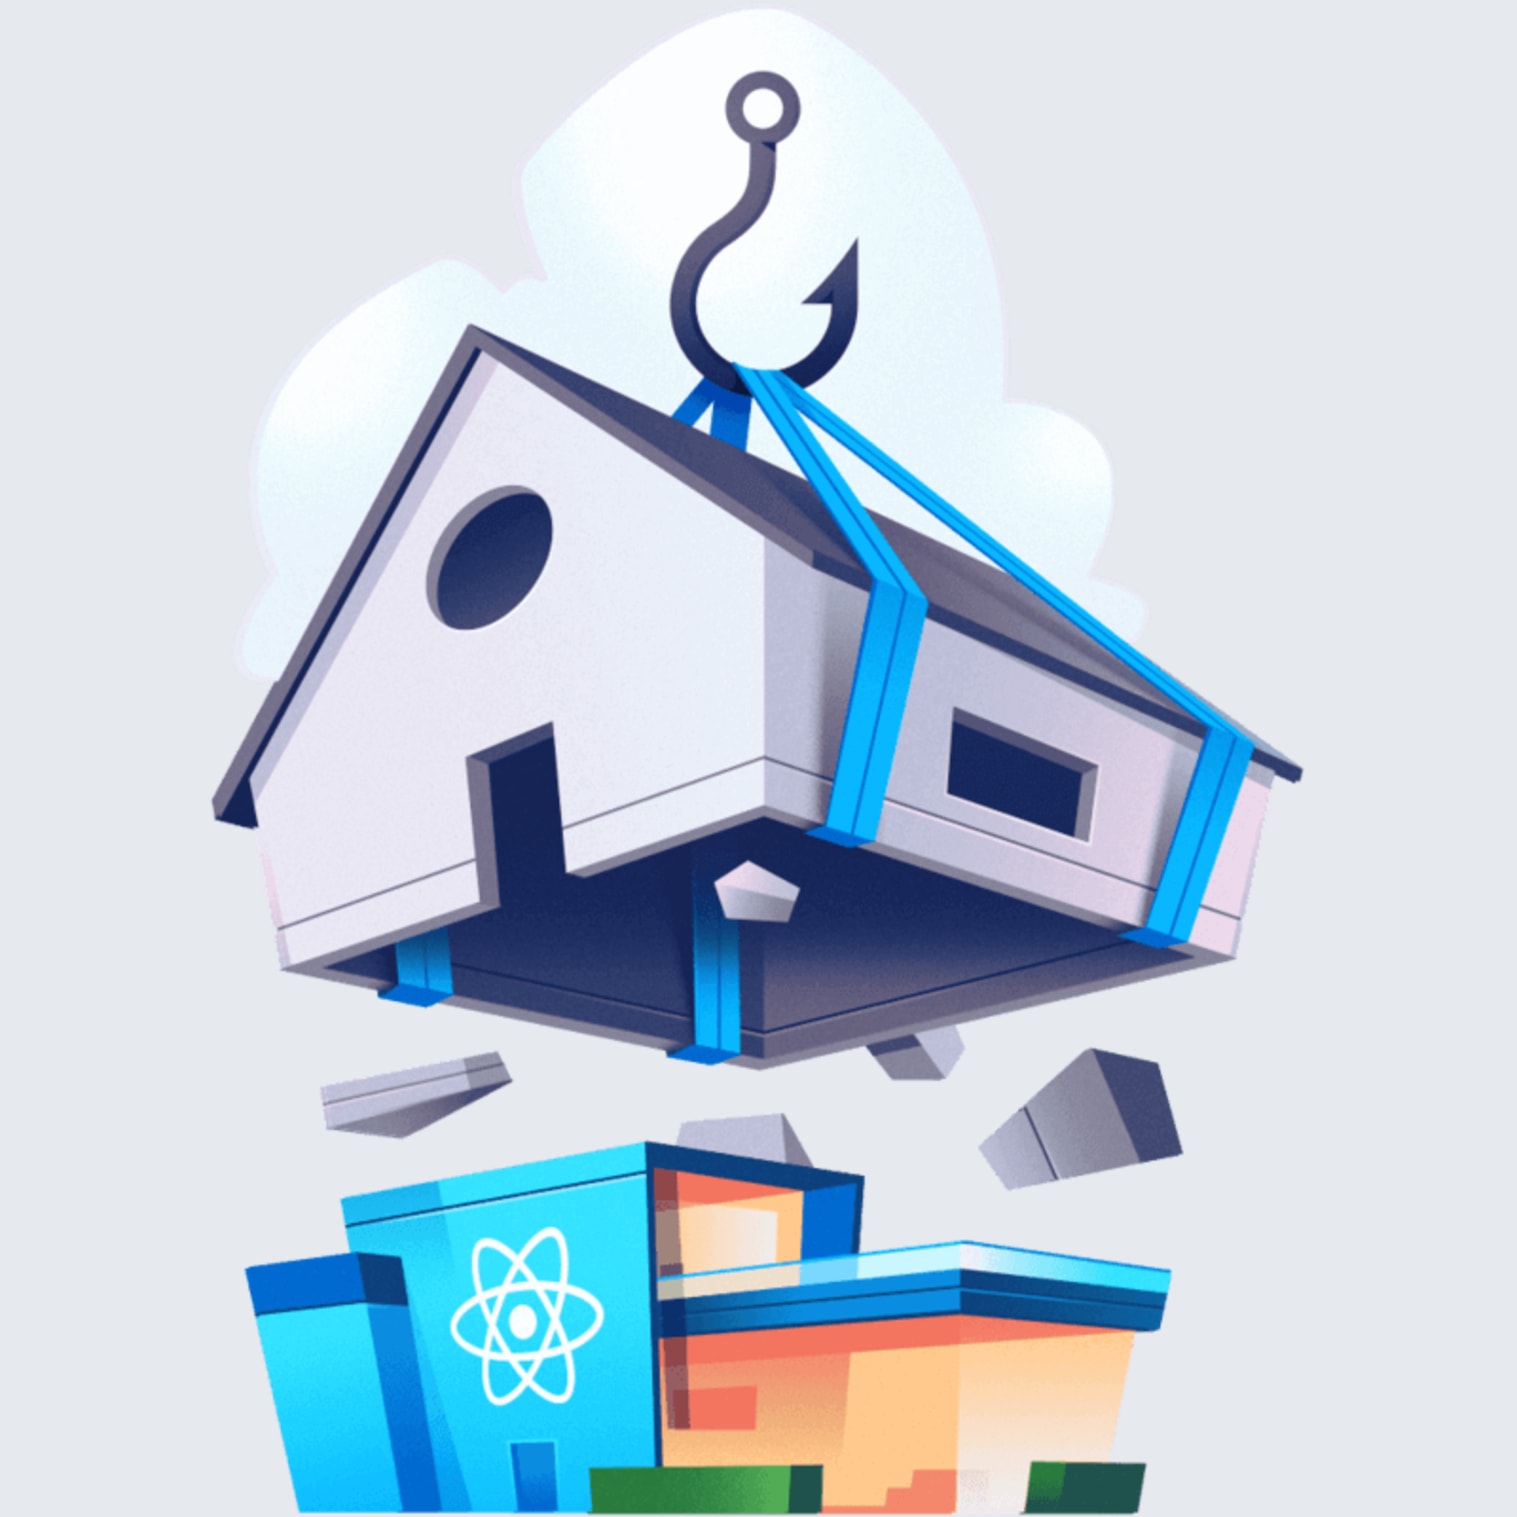 Introducing a new course: Simplify React Apps with React Hooks and Suspense